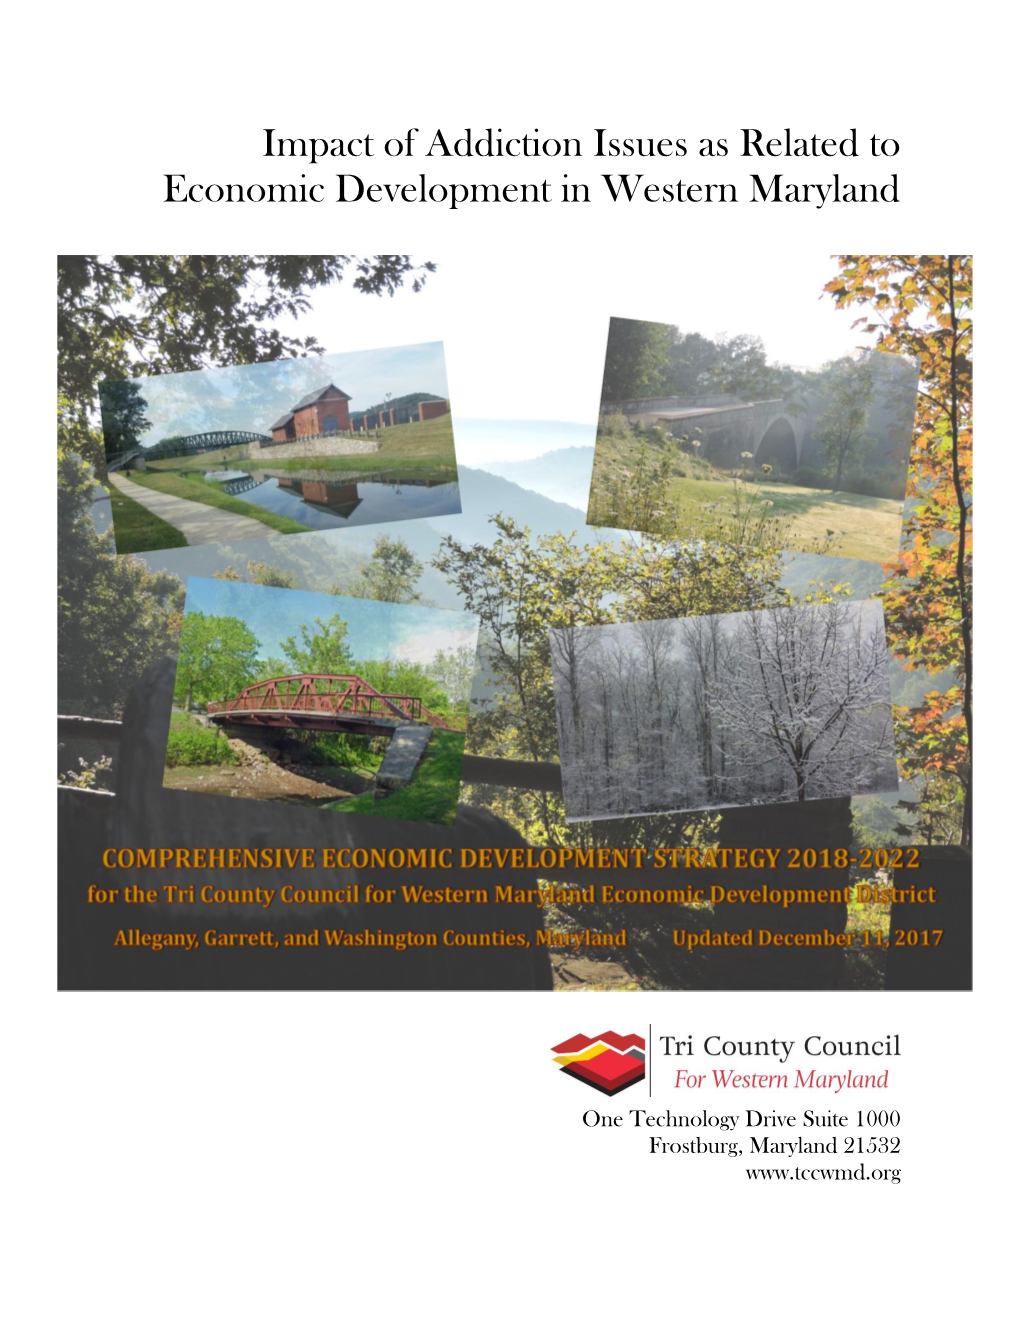 Impact of Addiction Issues As Related to Economic Development in Western Maryland